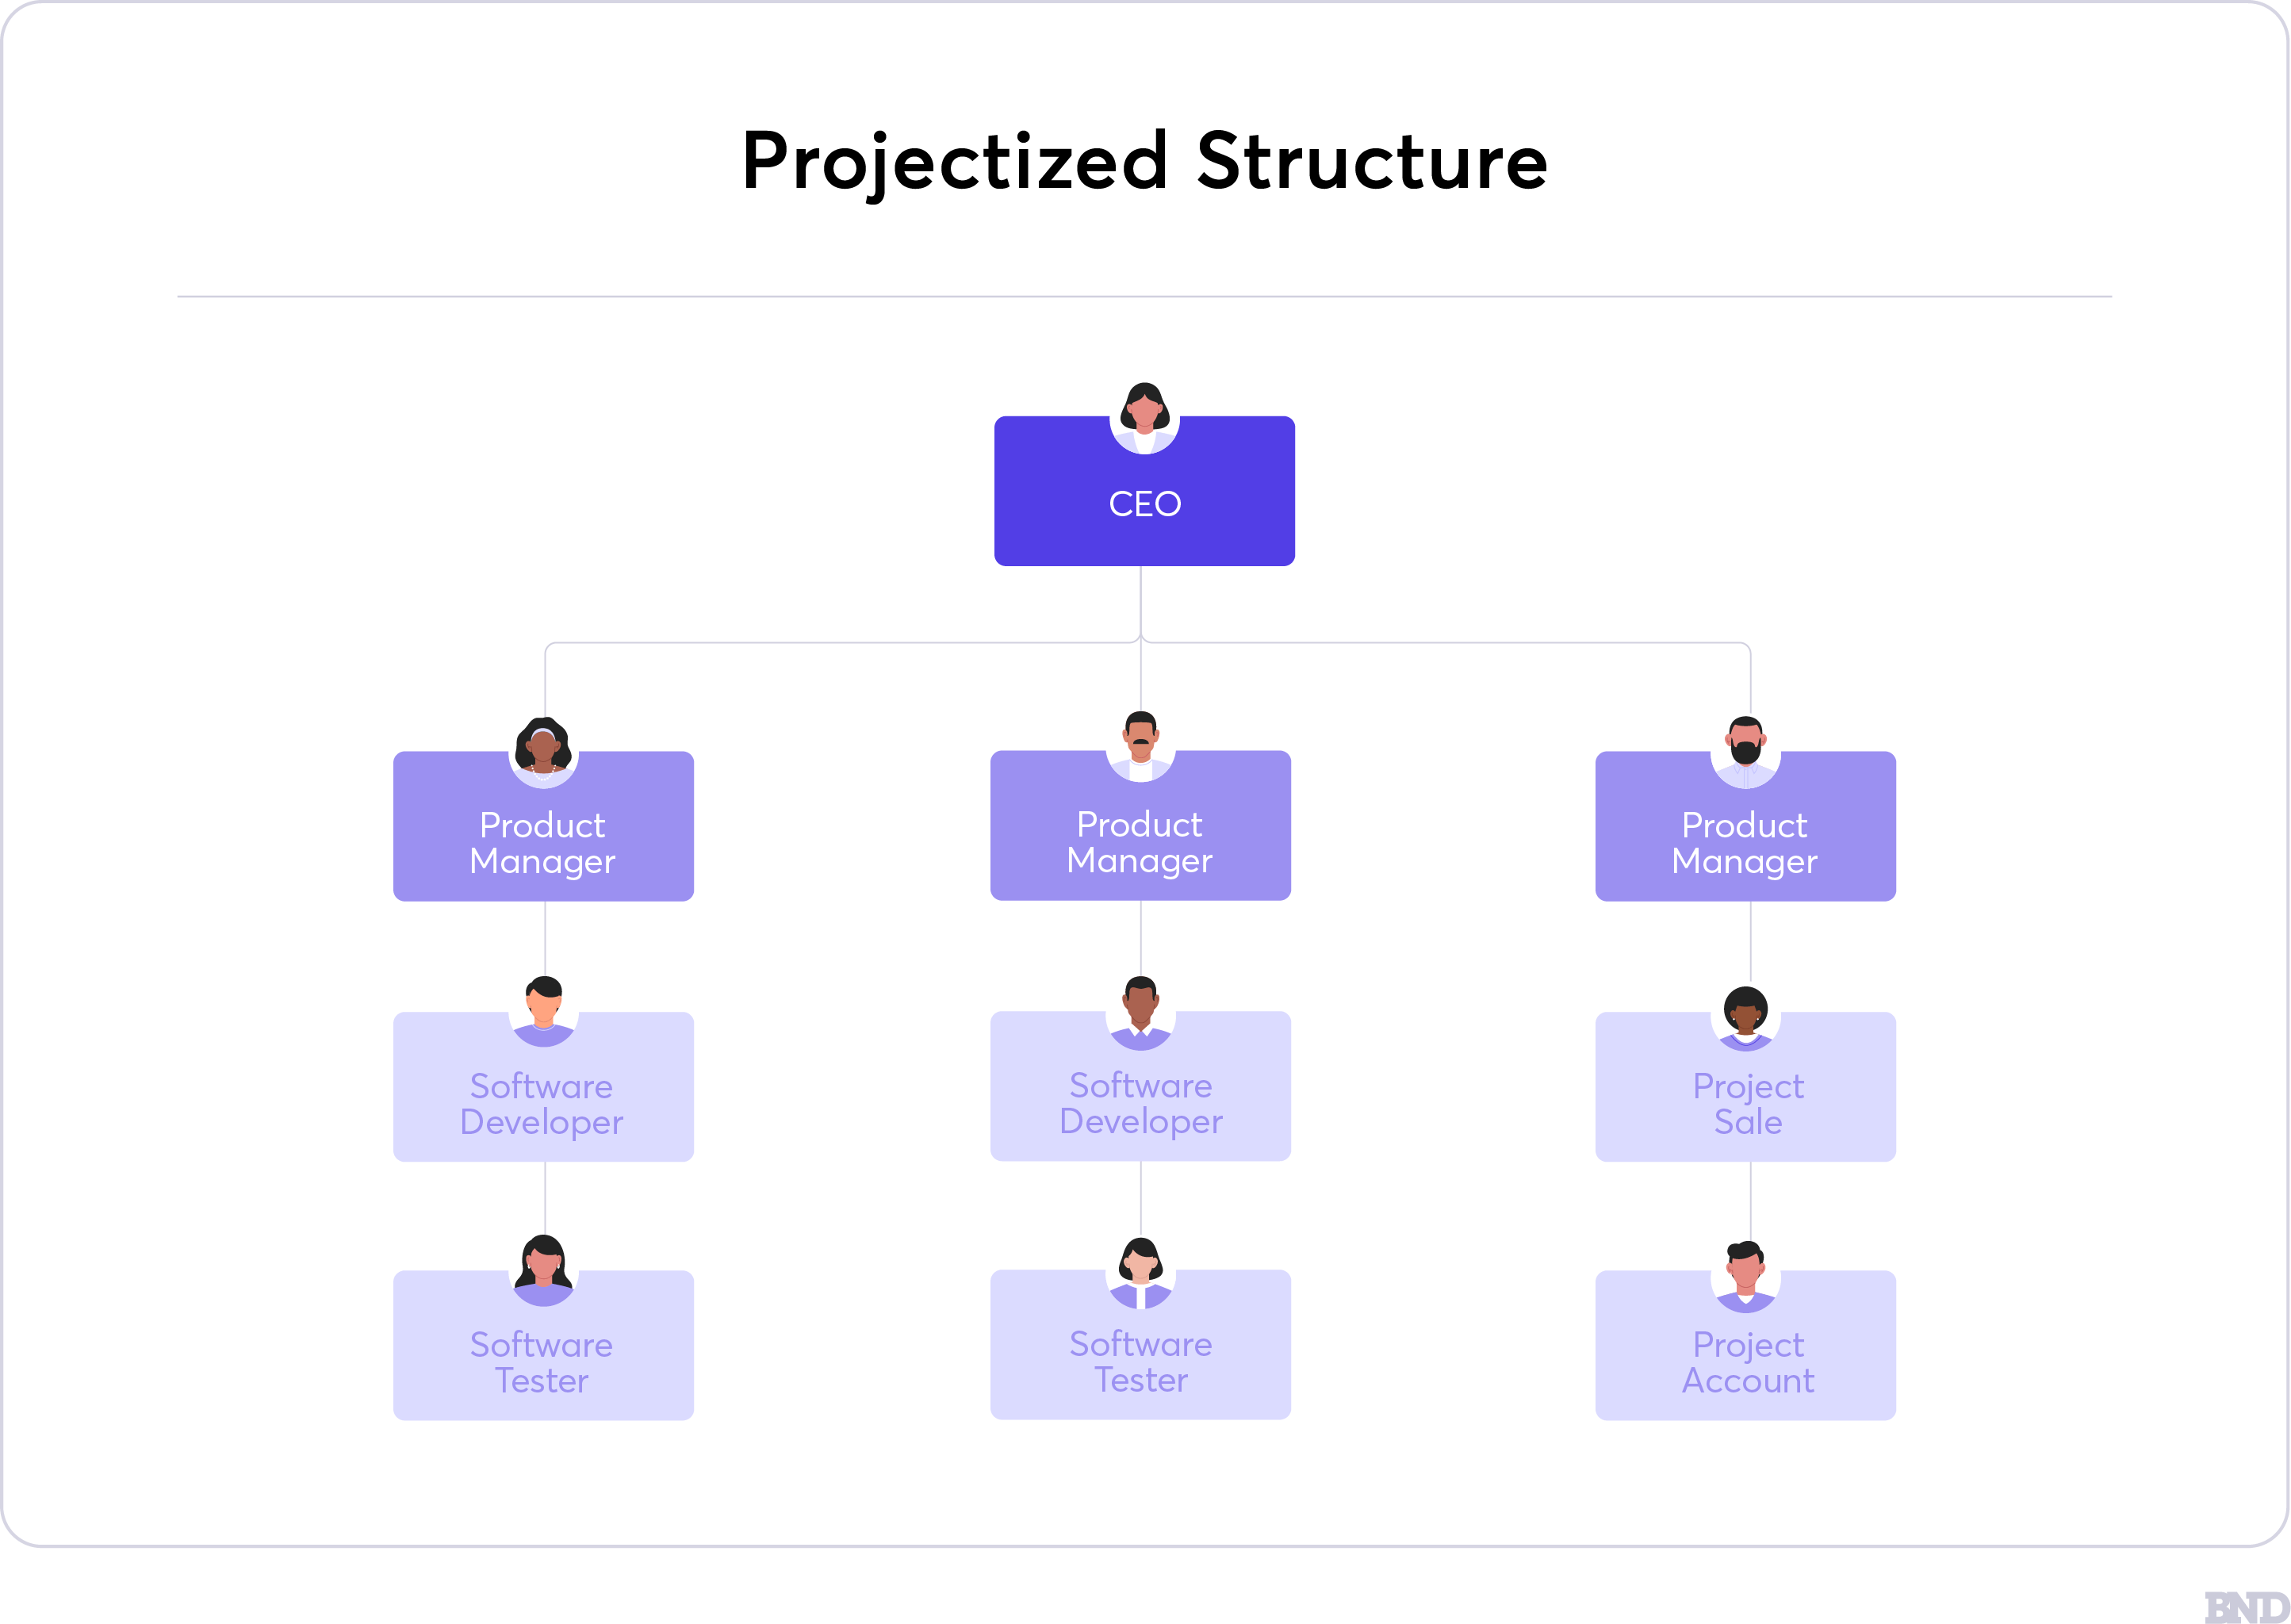 Projectized Structure graphic